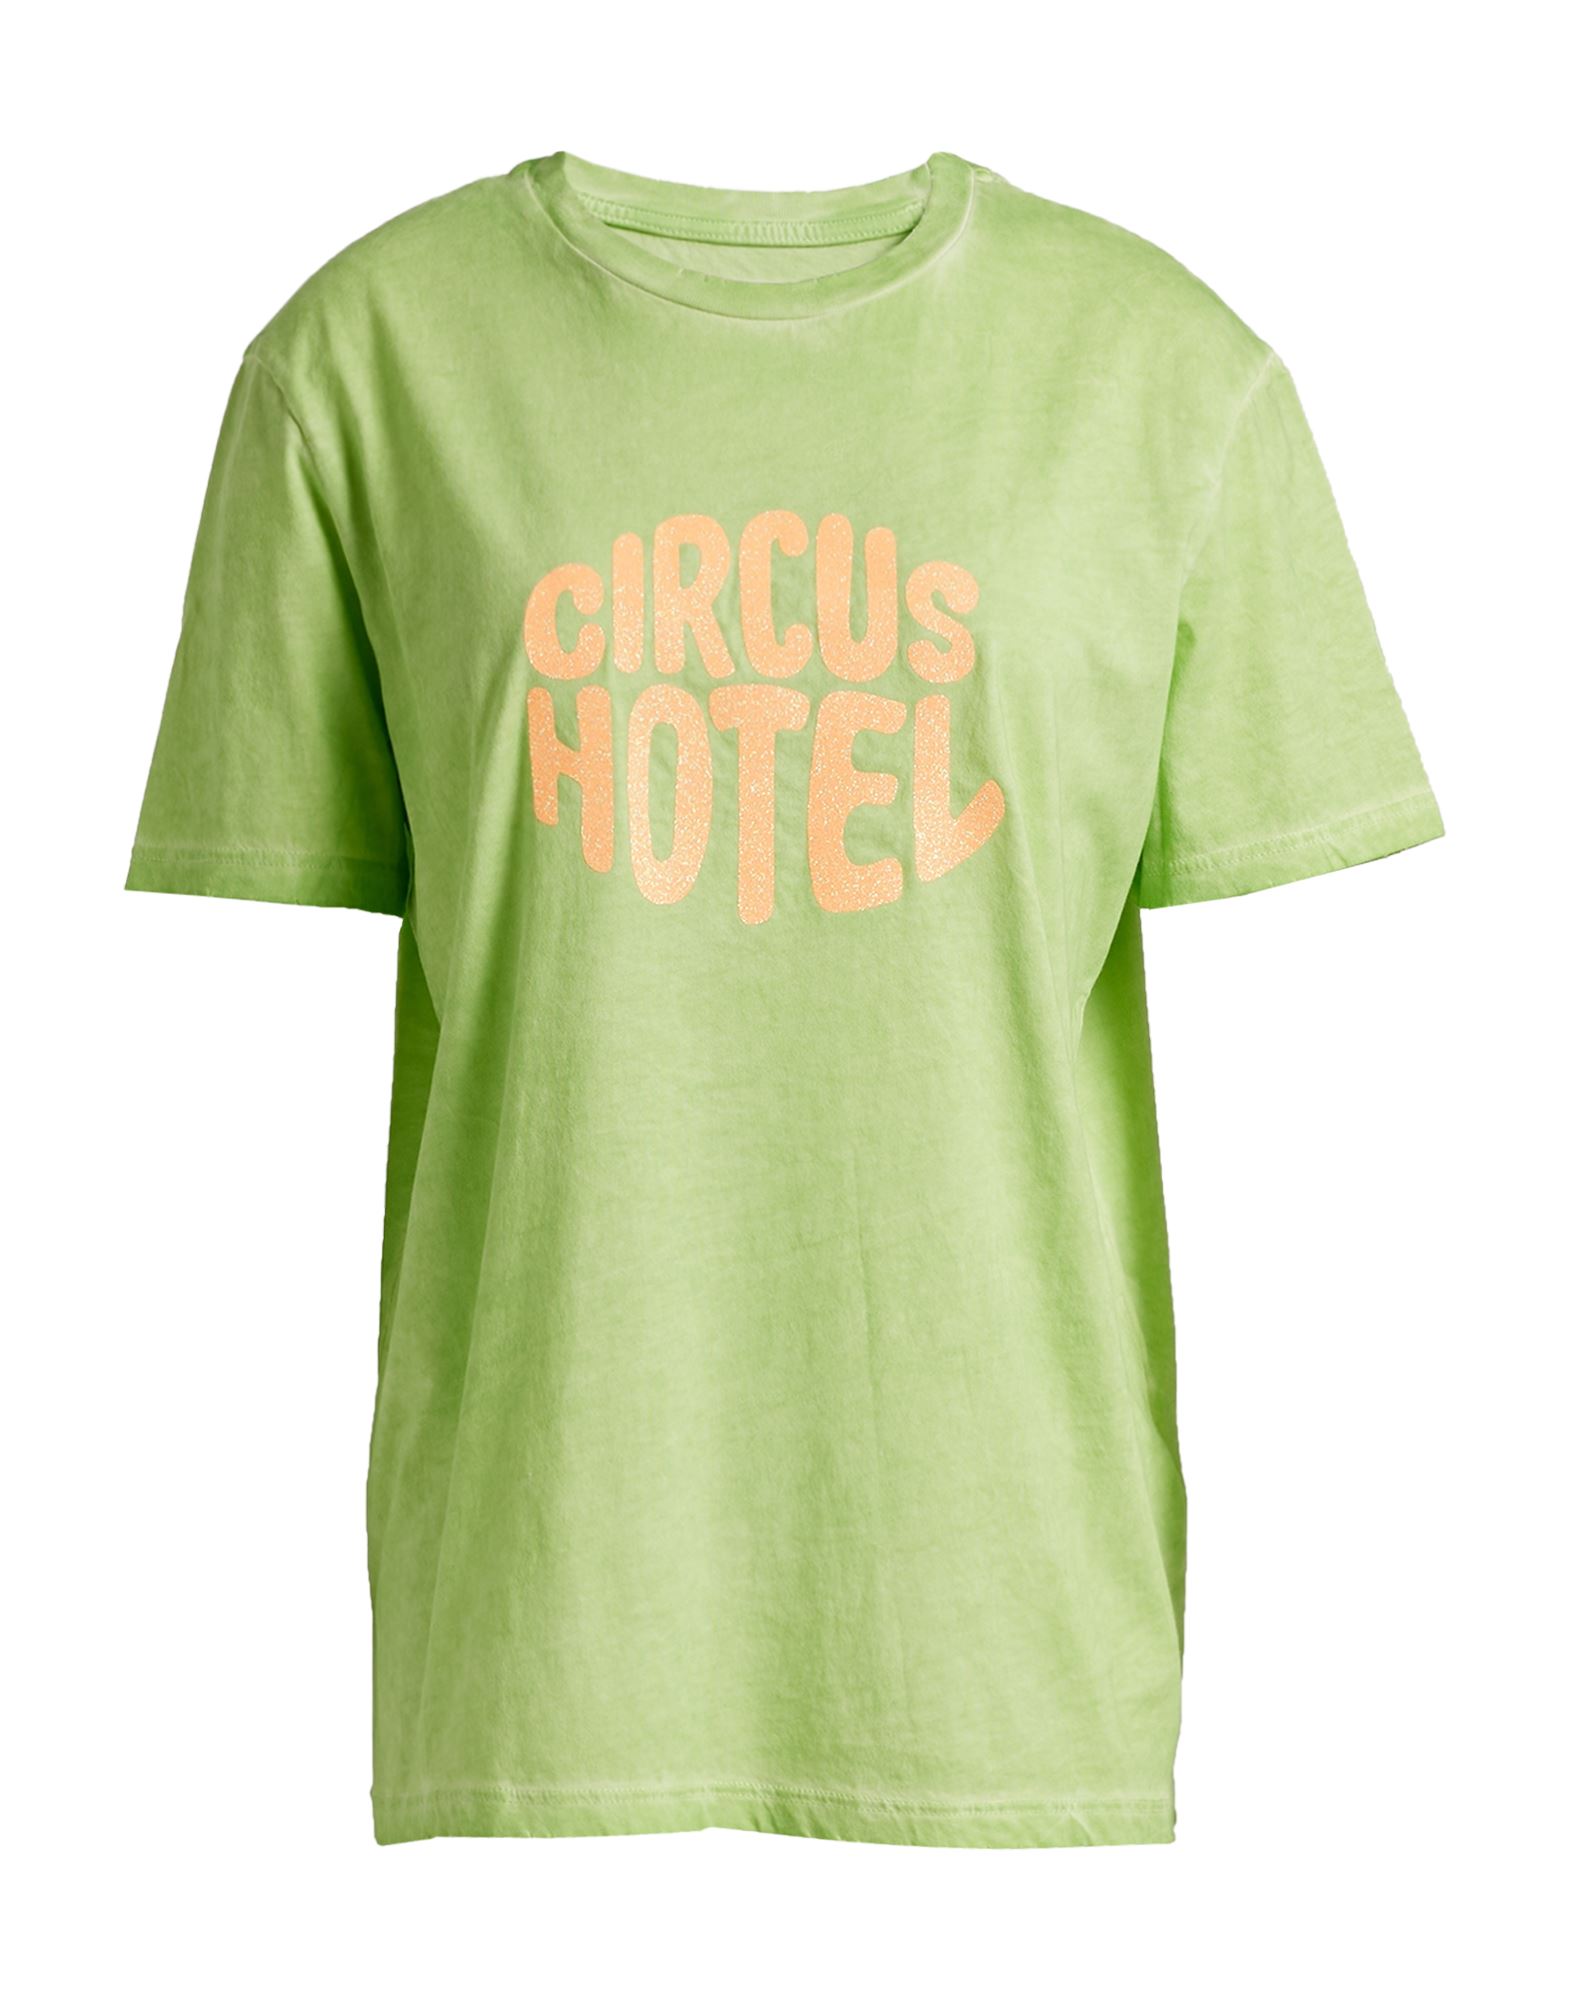 Circus Hotel T-shirts In Green